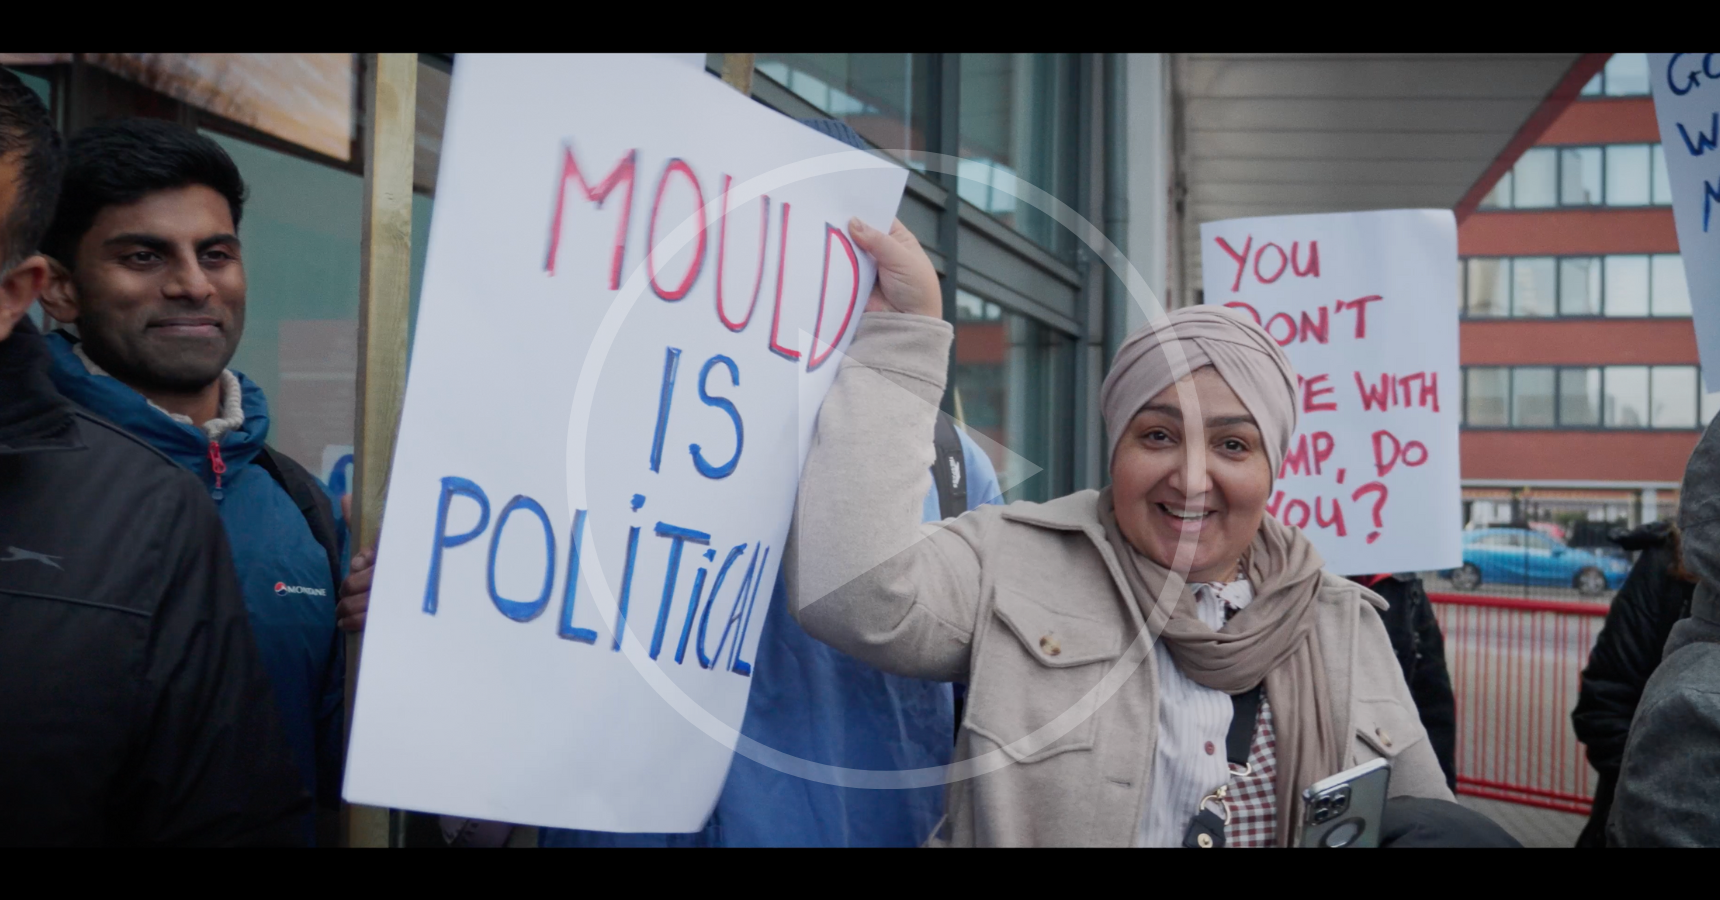 WATCH: ‘Mould is Political’